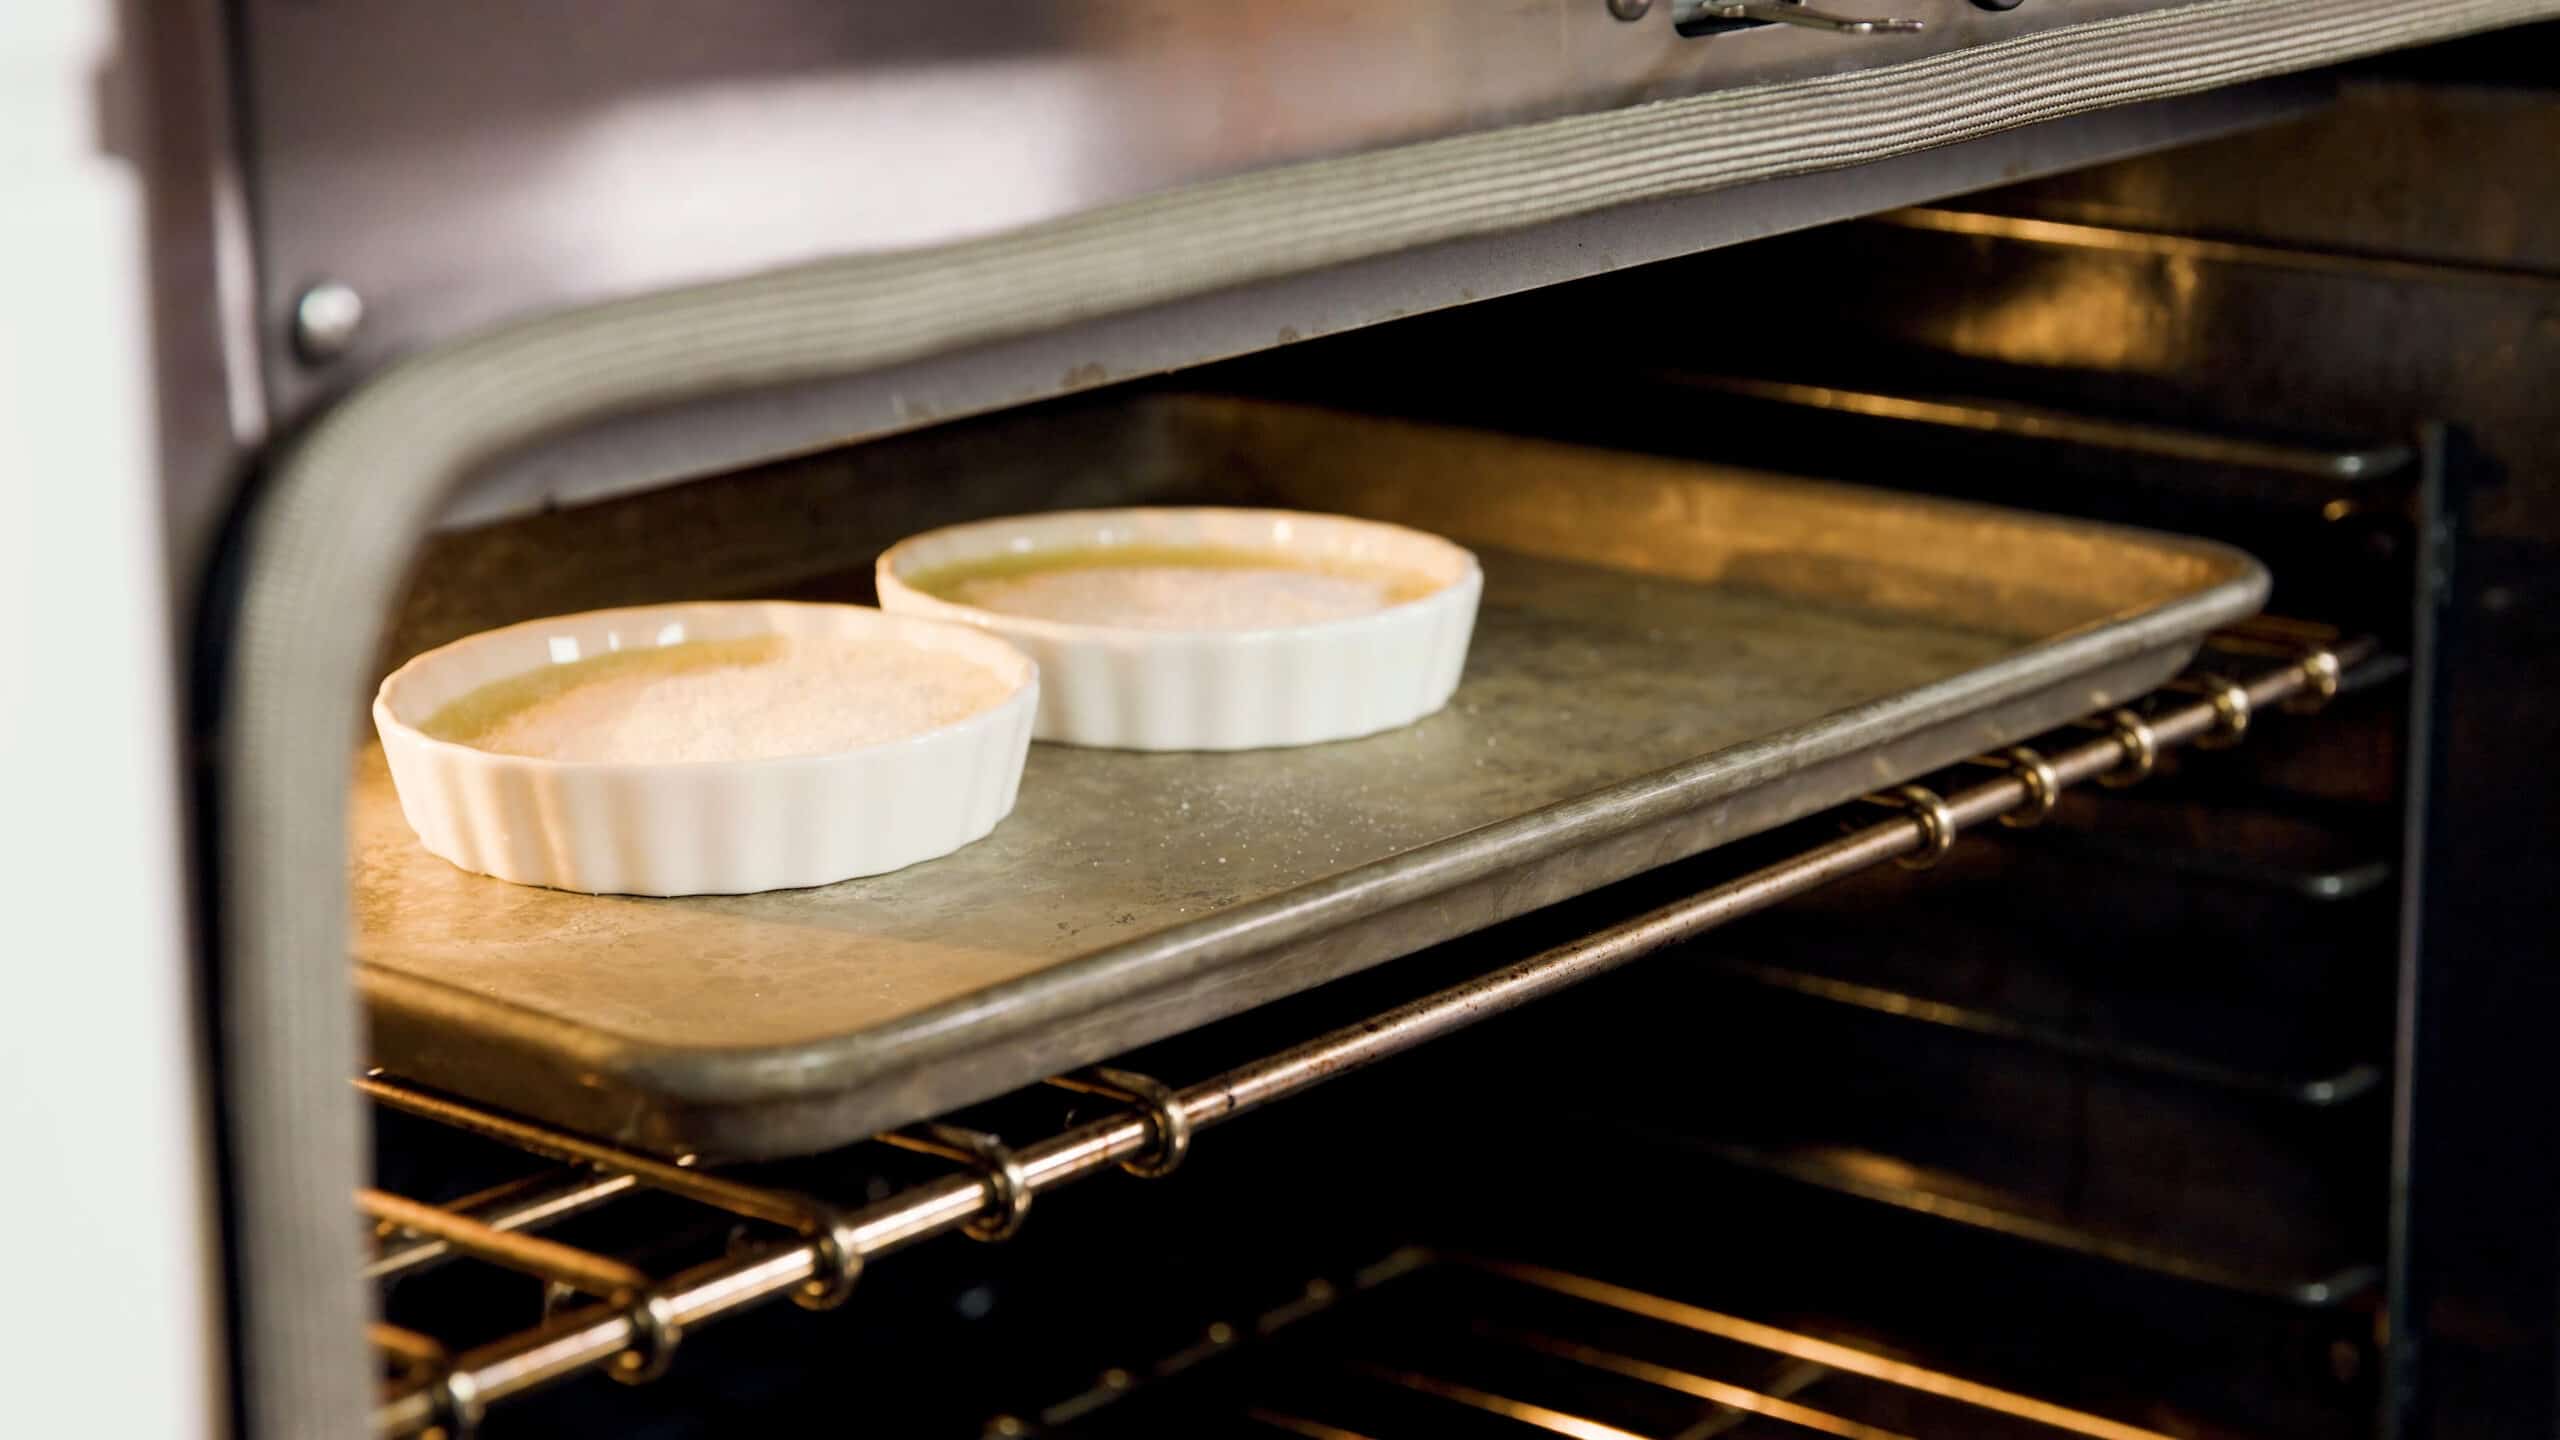 Angled view of open oven with a metal baking dish with two white glass ramekins filled with chilled egg mixture covered with white granulated sugar on a metal rack raised to the top level just under the broiling element of the oven.